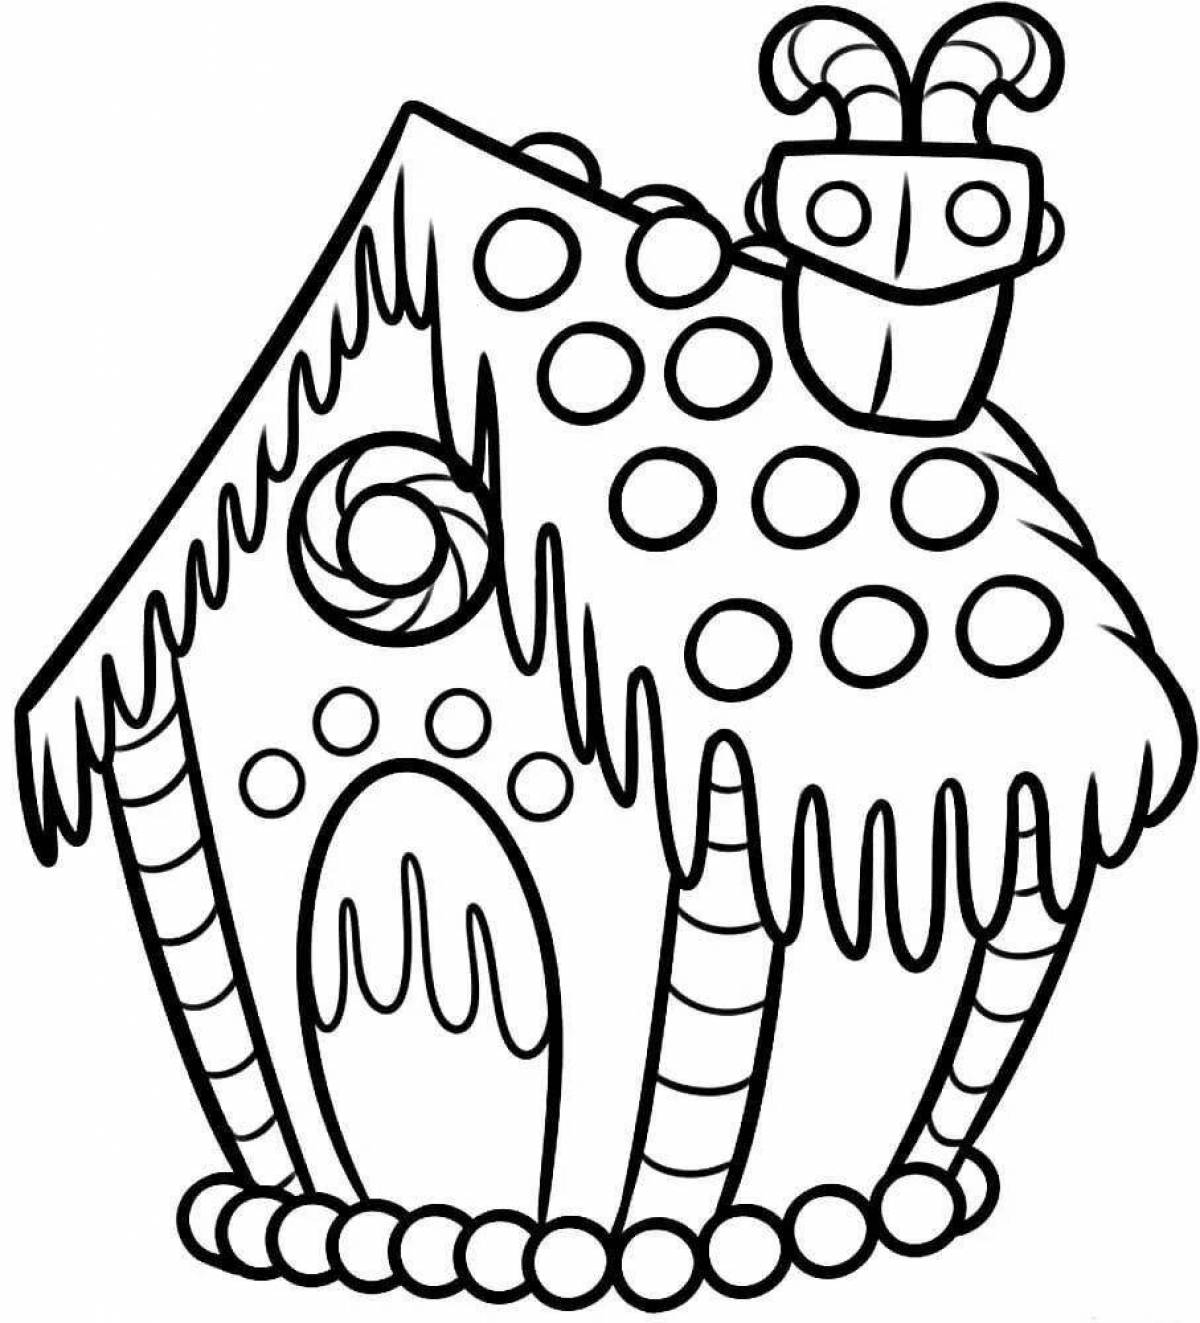 Impressive gingerbread house coloring page for kids